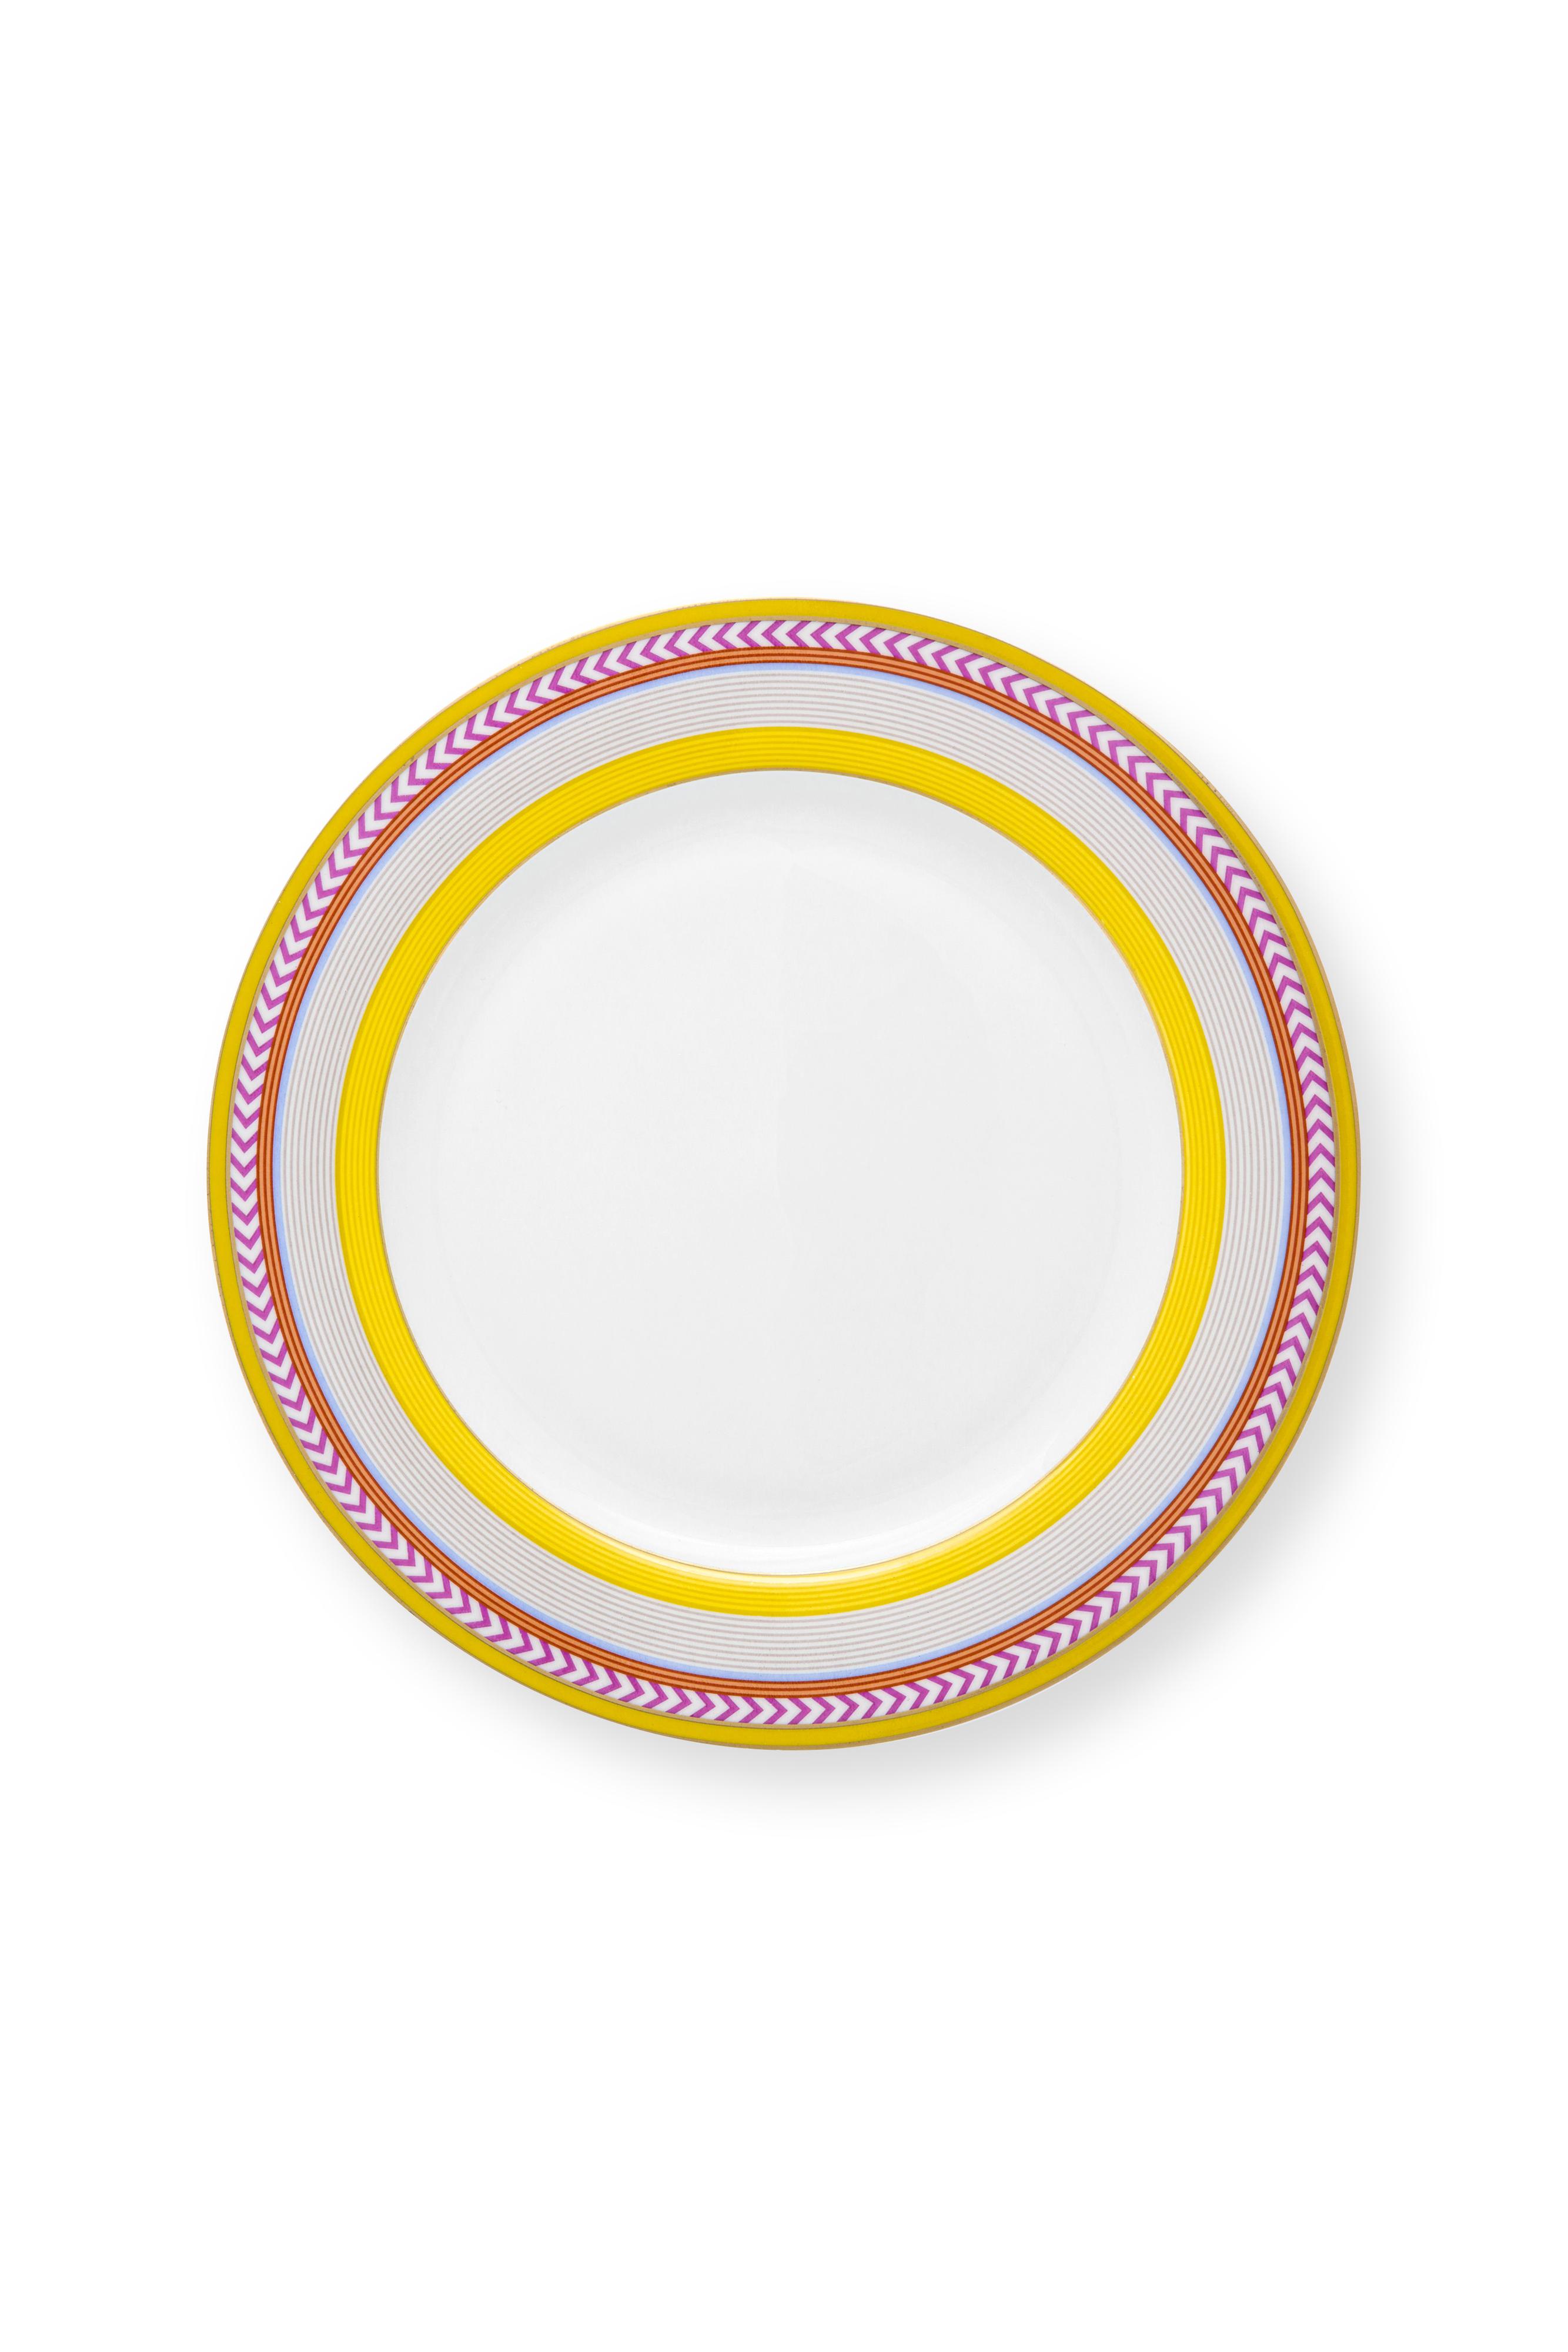 Plate Pip Chique Stripes Yellow 23cm Gift